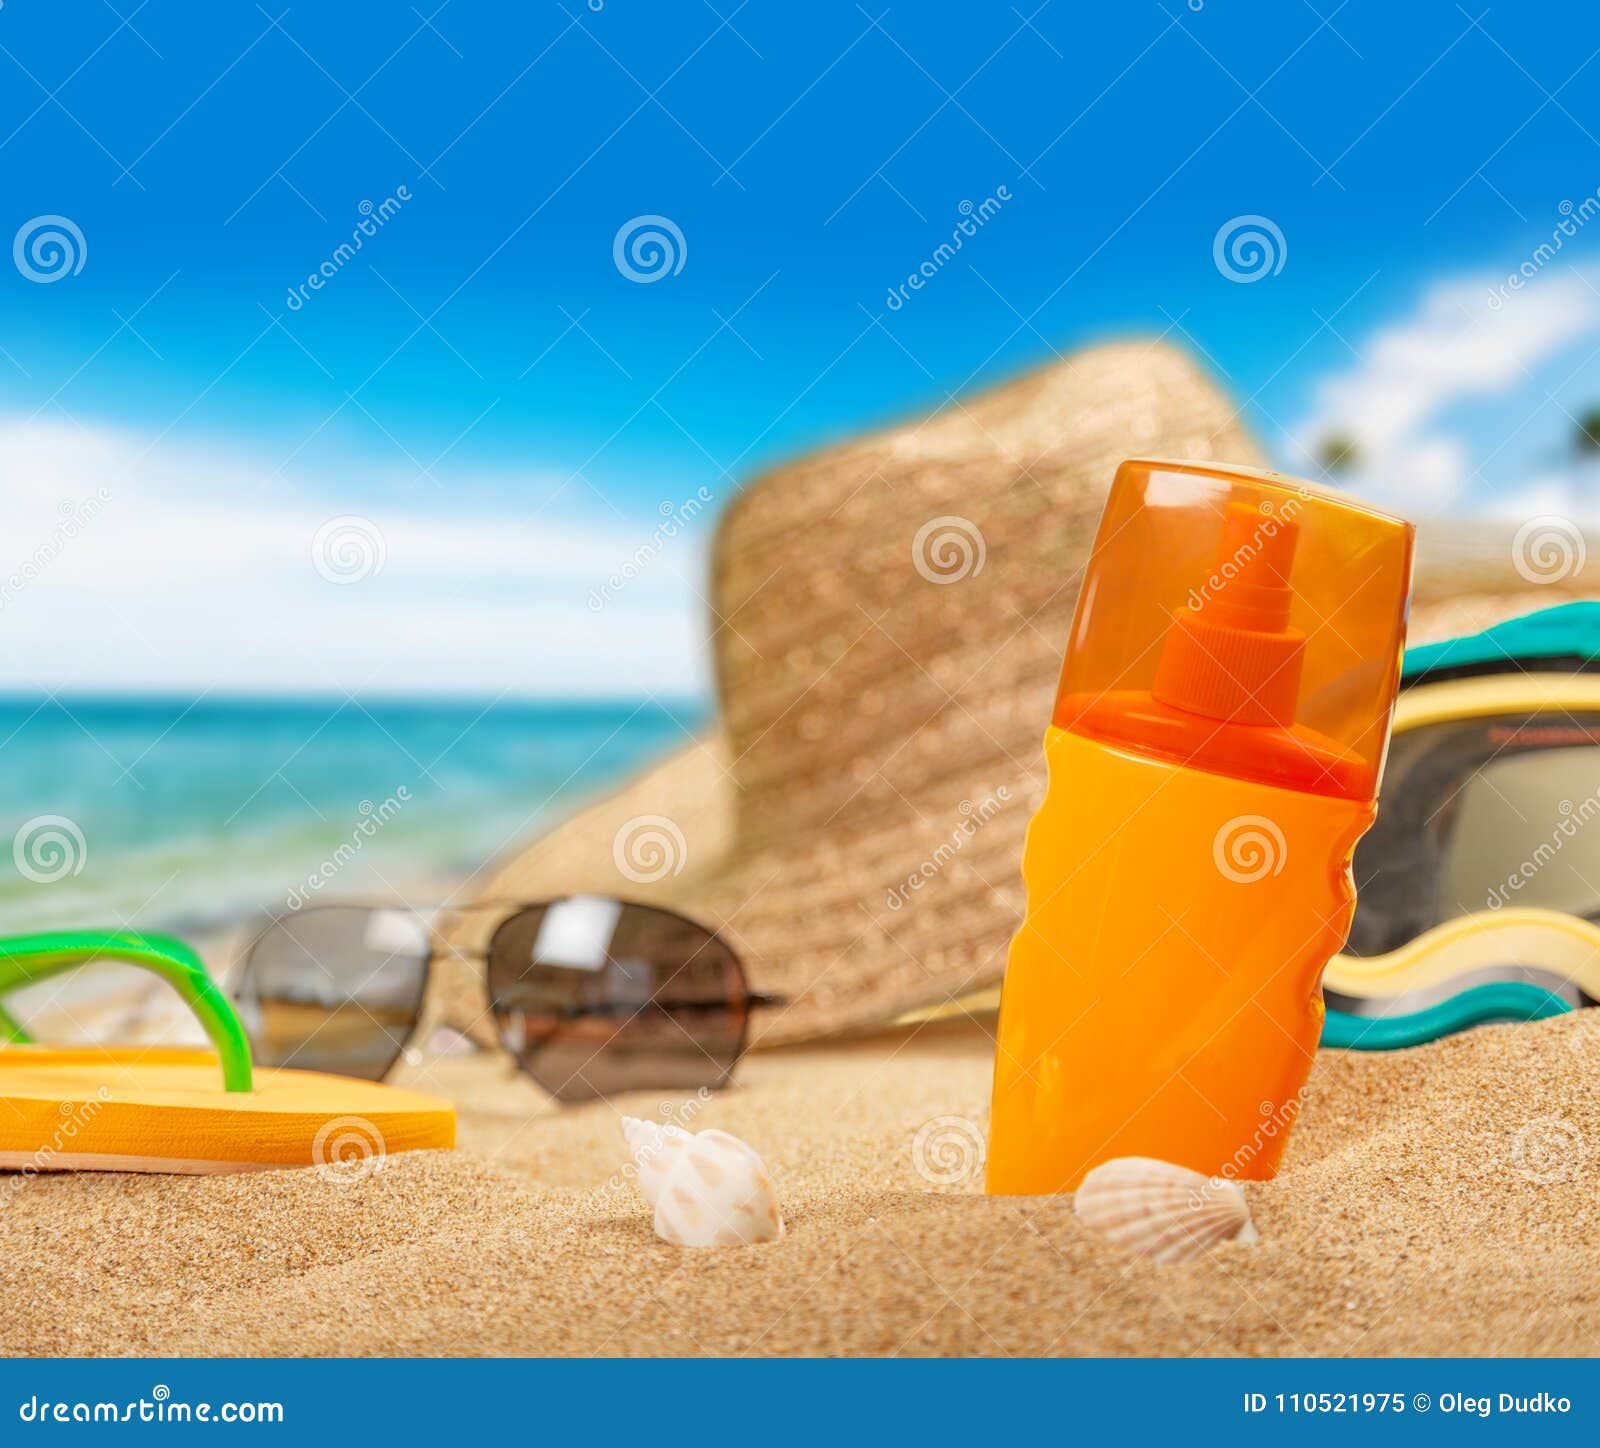 Bottle of Sunscreen Lotion on the Sandy Beach Stock Image - Image of ...